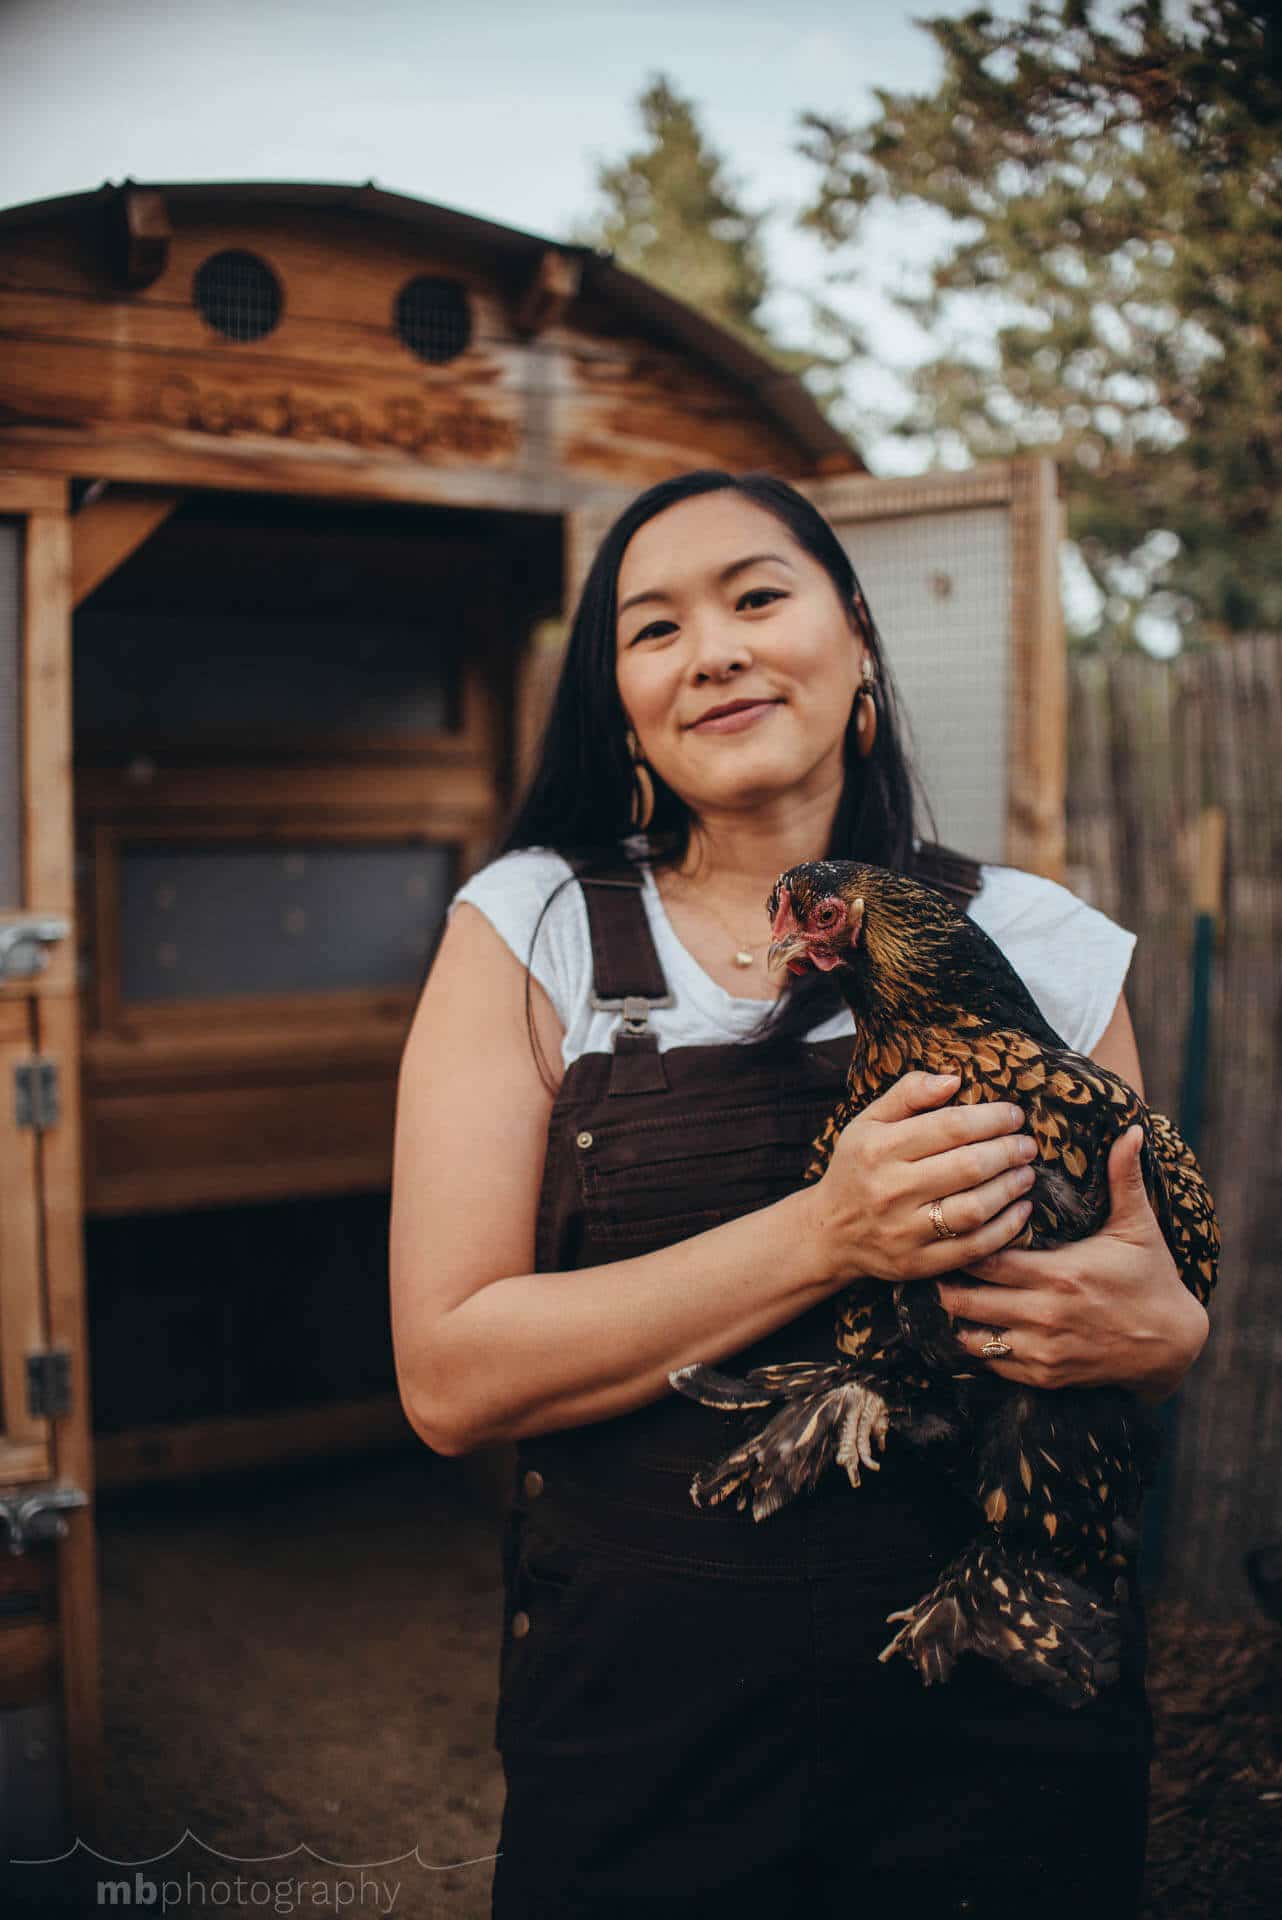 Garden Betty holding a Golden Laced Cochin chicken in front of the coop